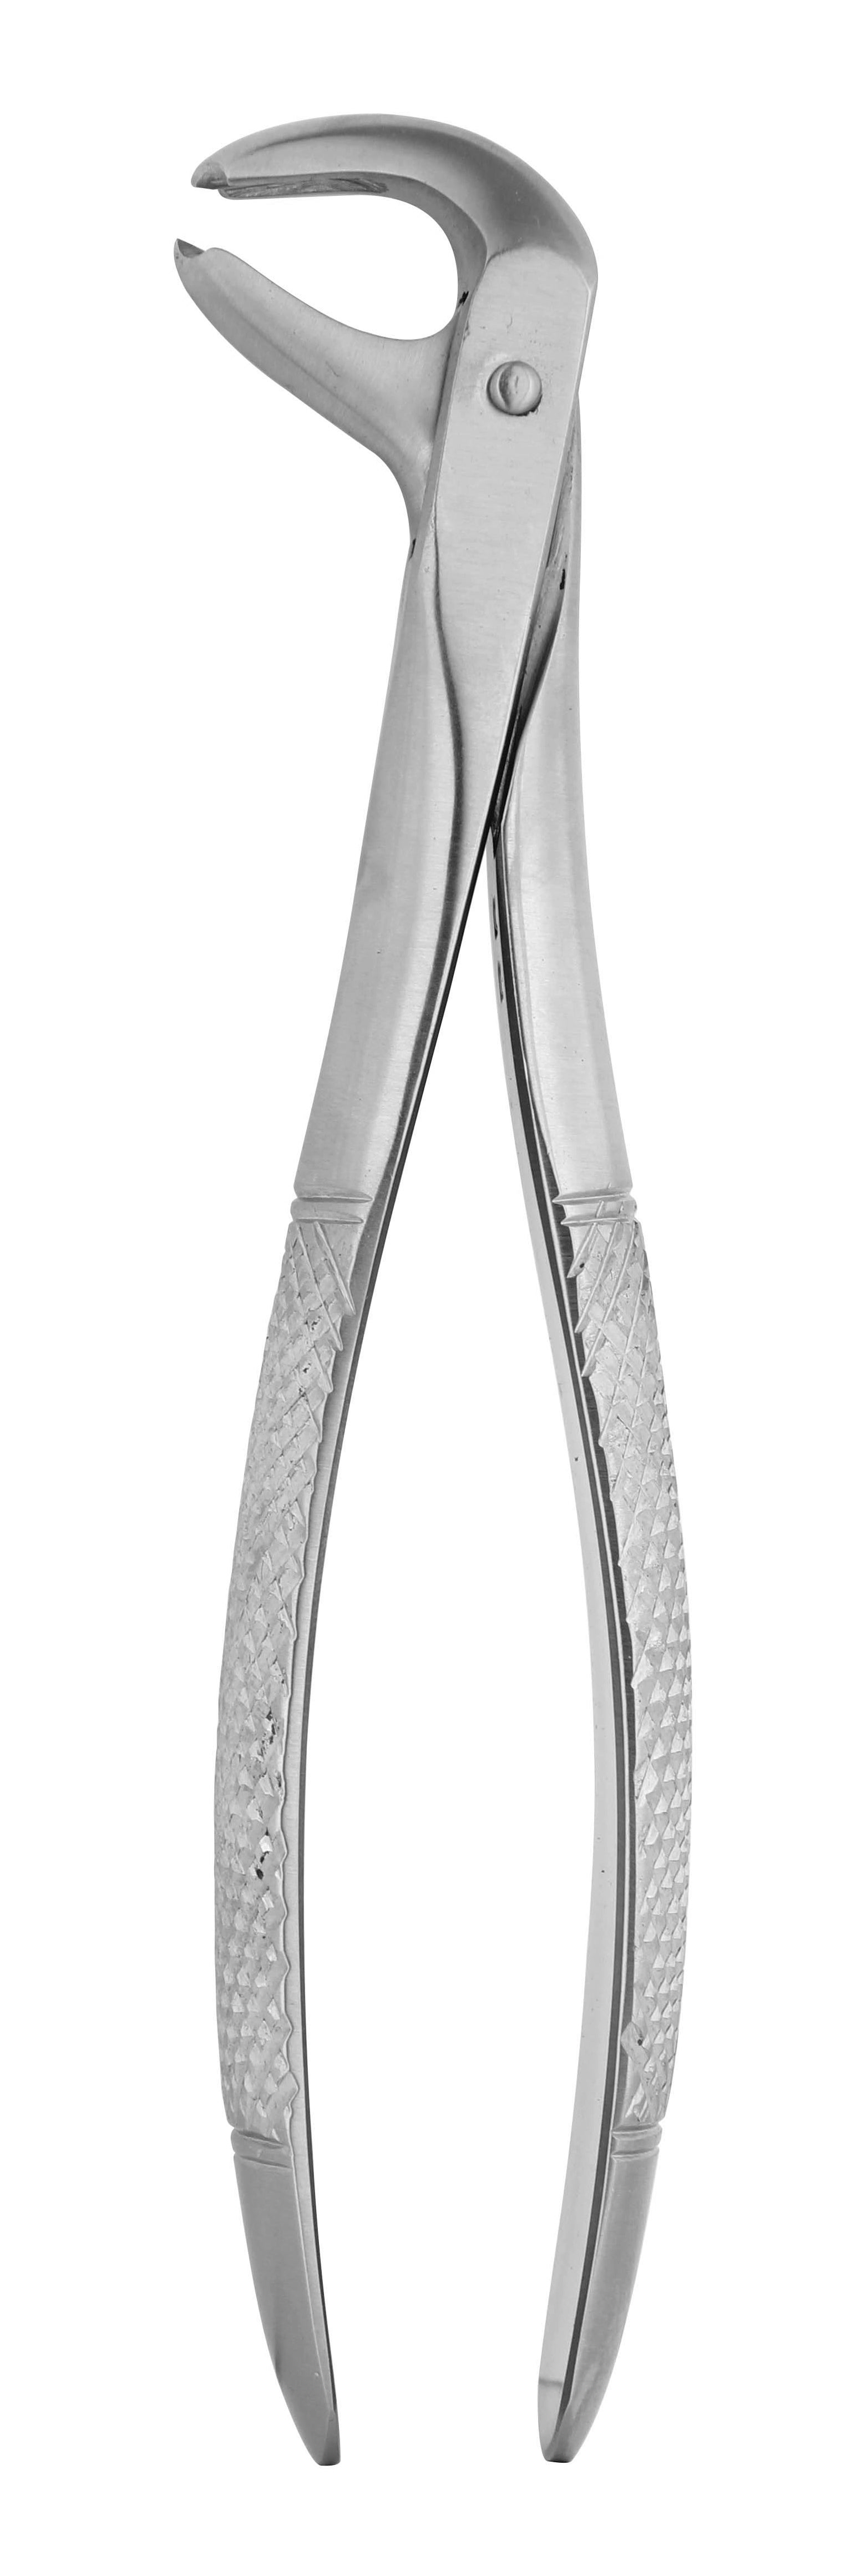 Extraction Forceps 073E